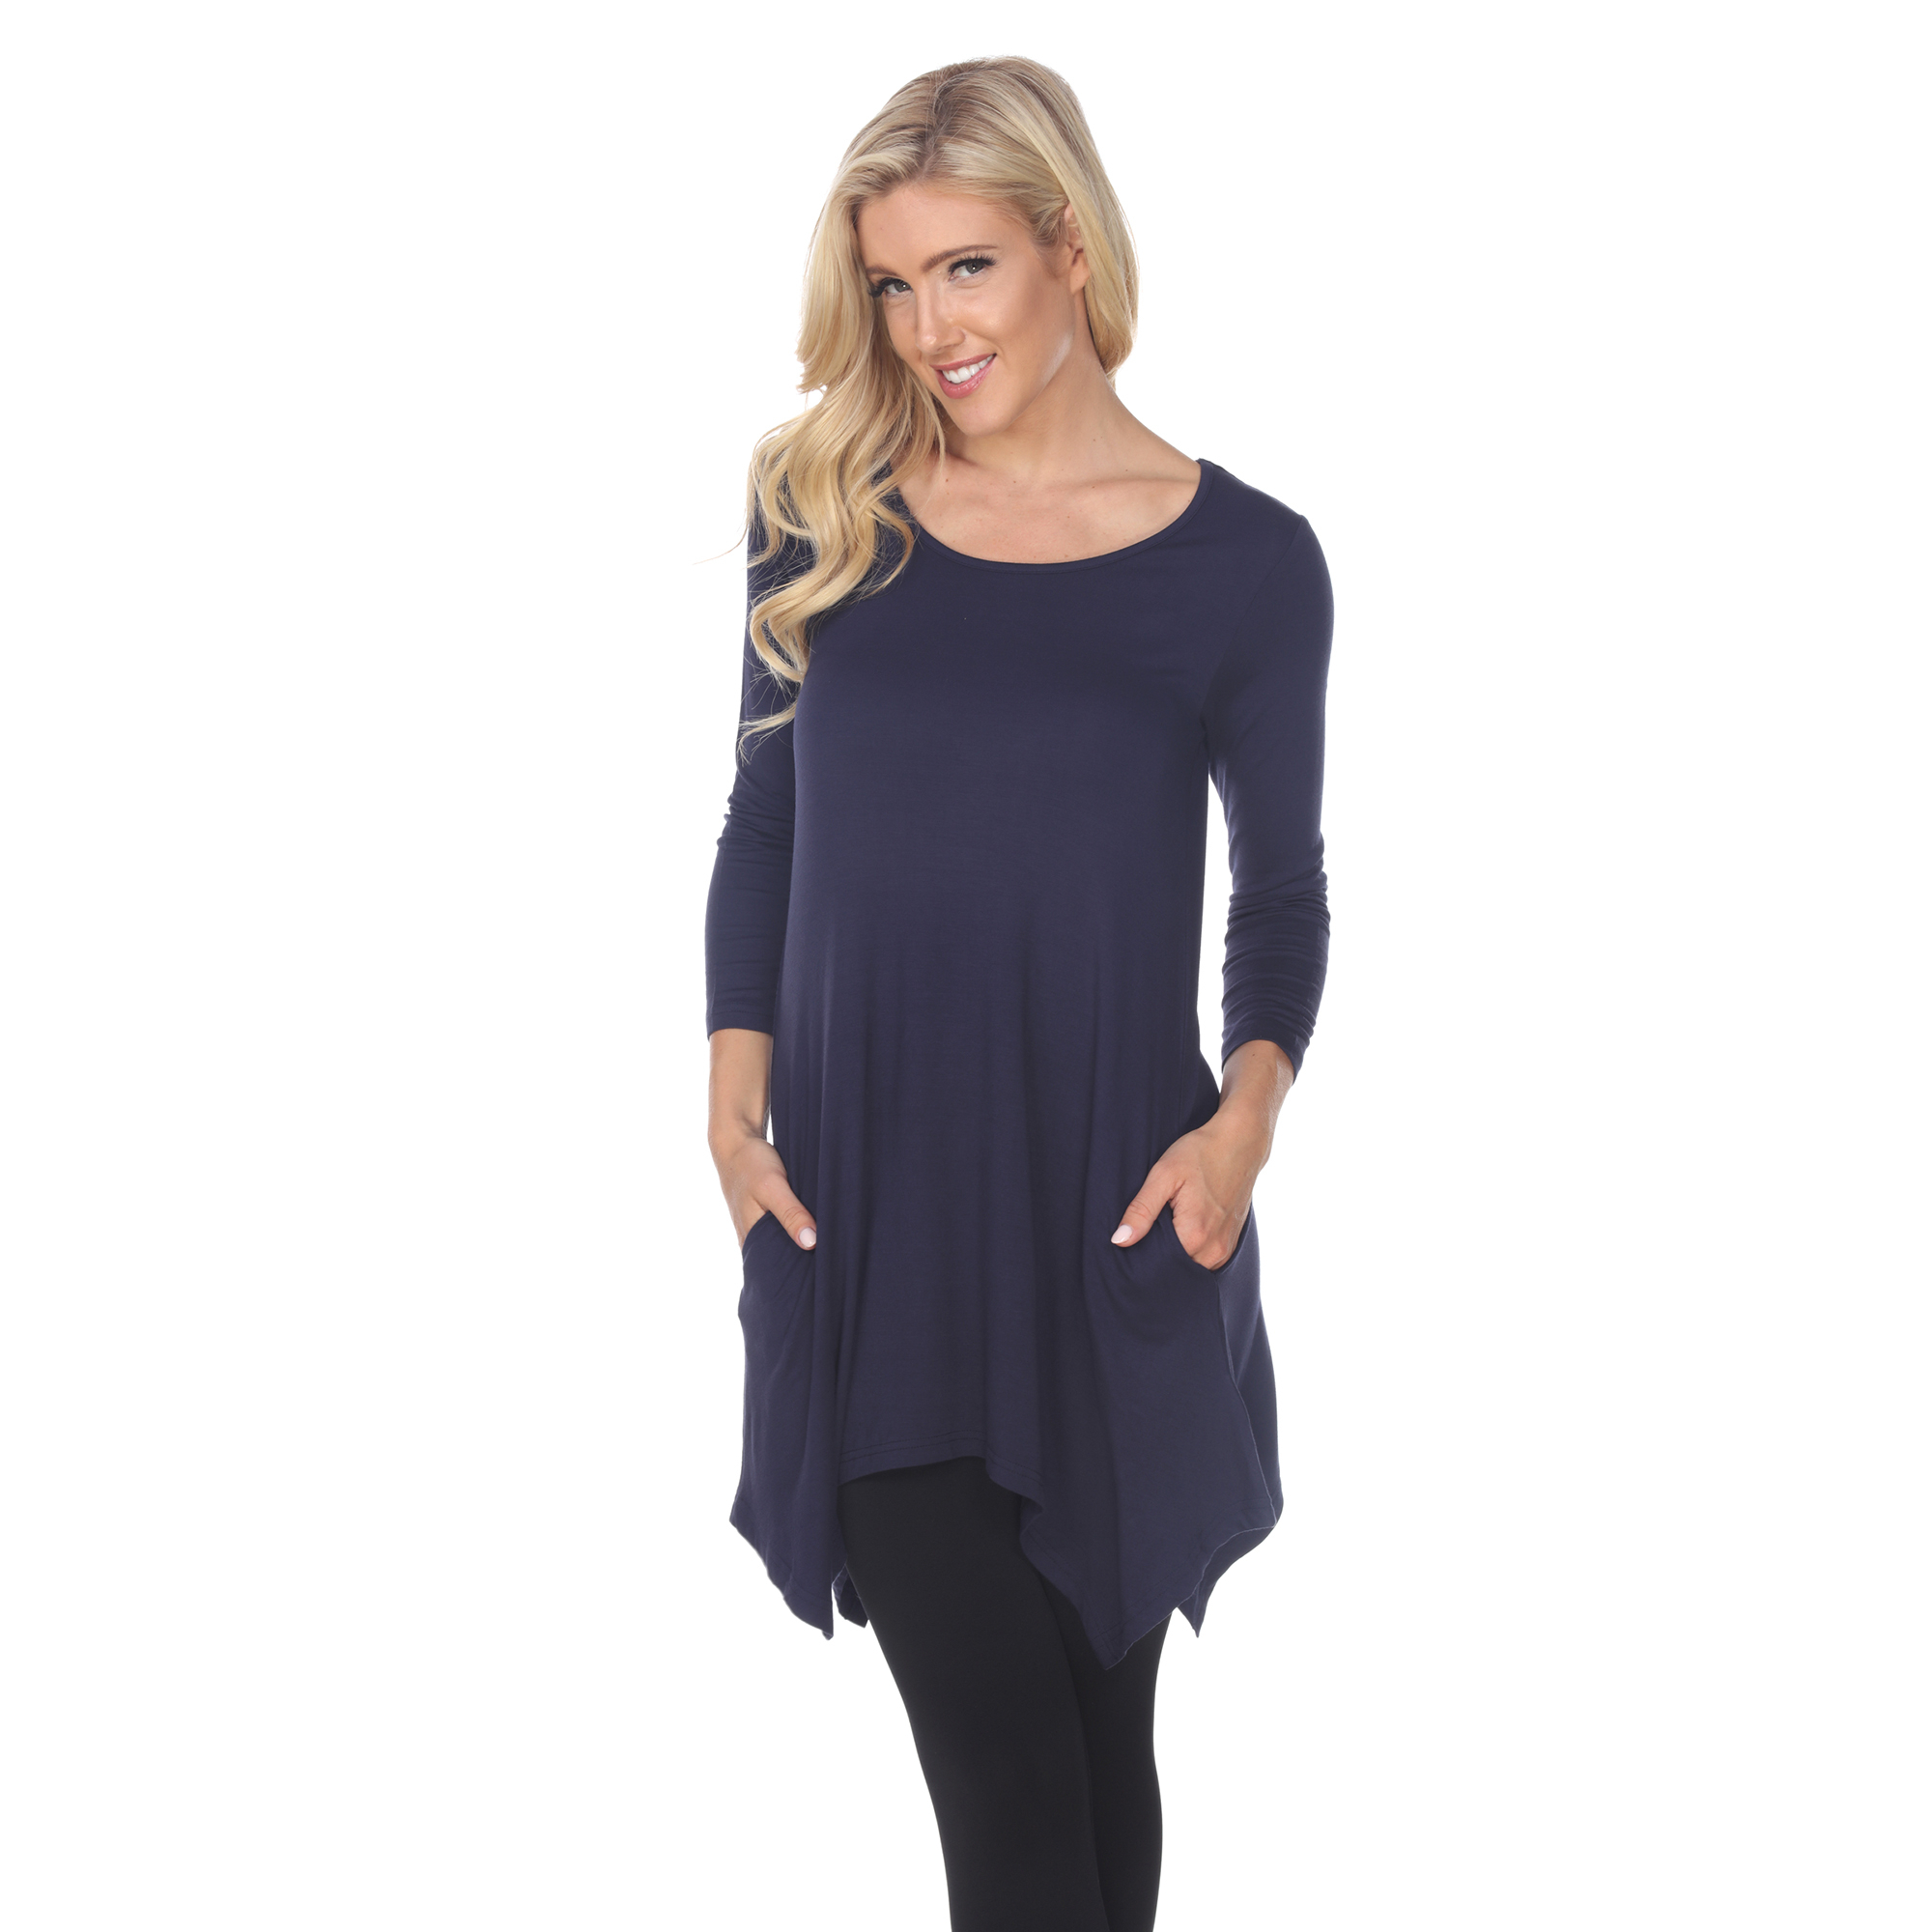 White Mark Women's Quarter Sleeve Tunic Top With Pockets - Navy, 6X